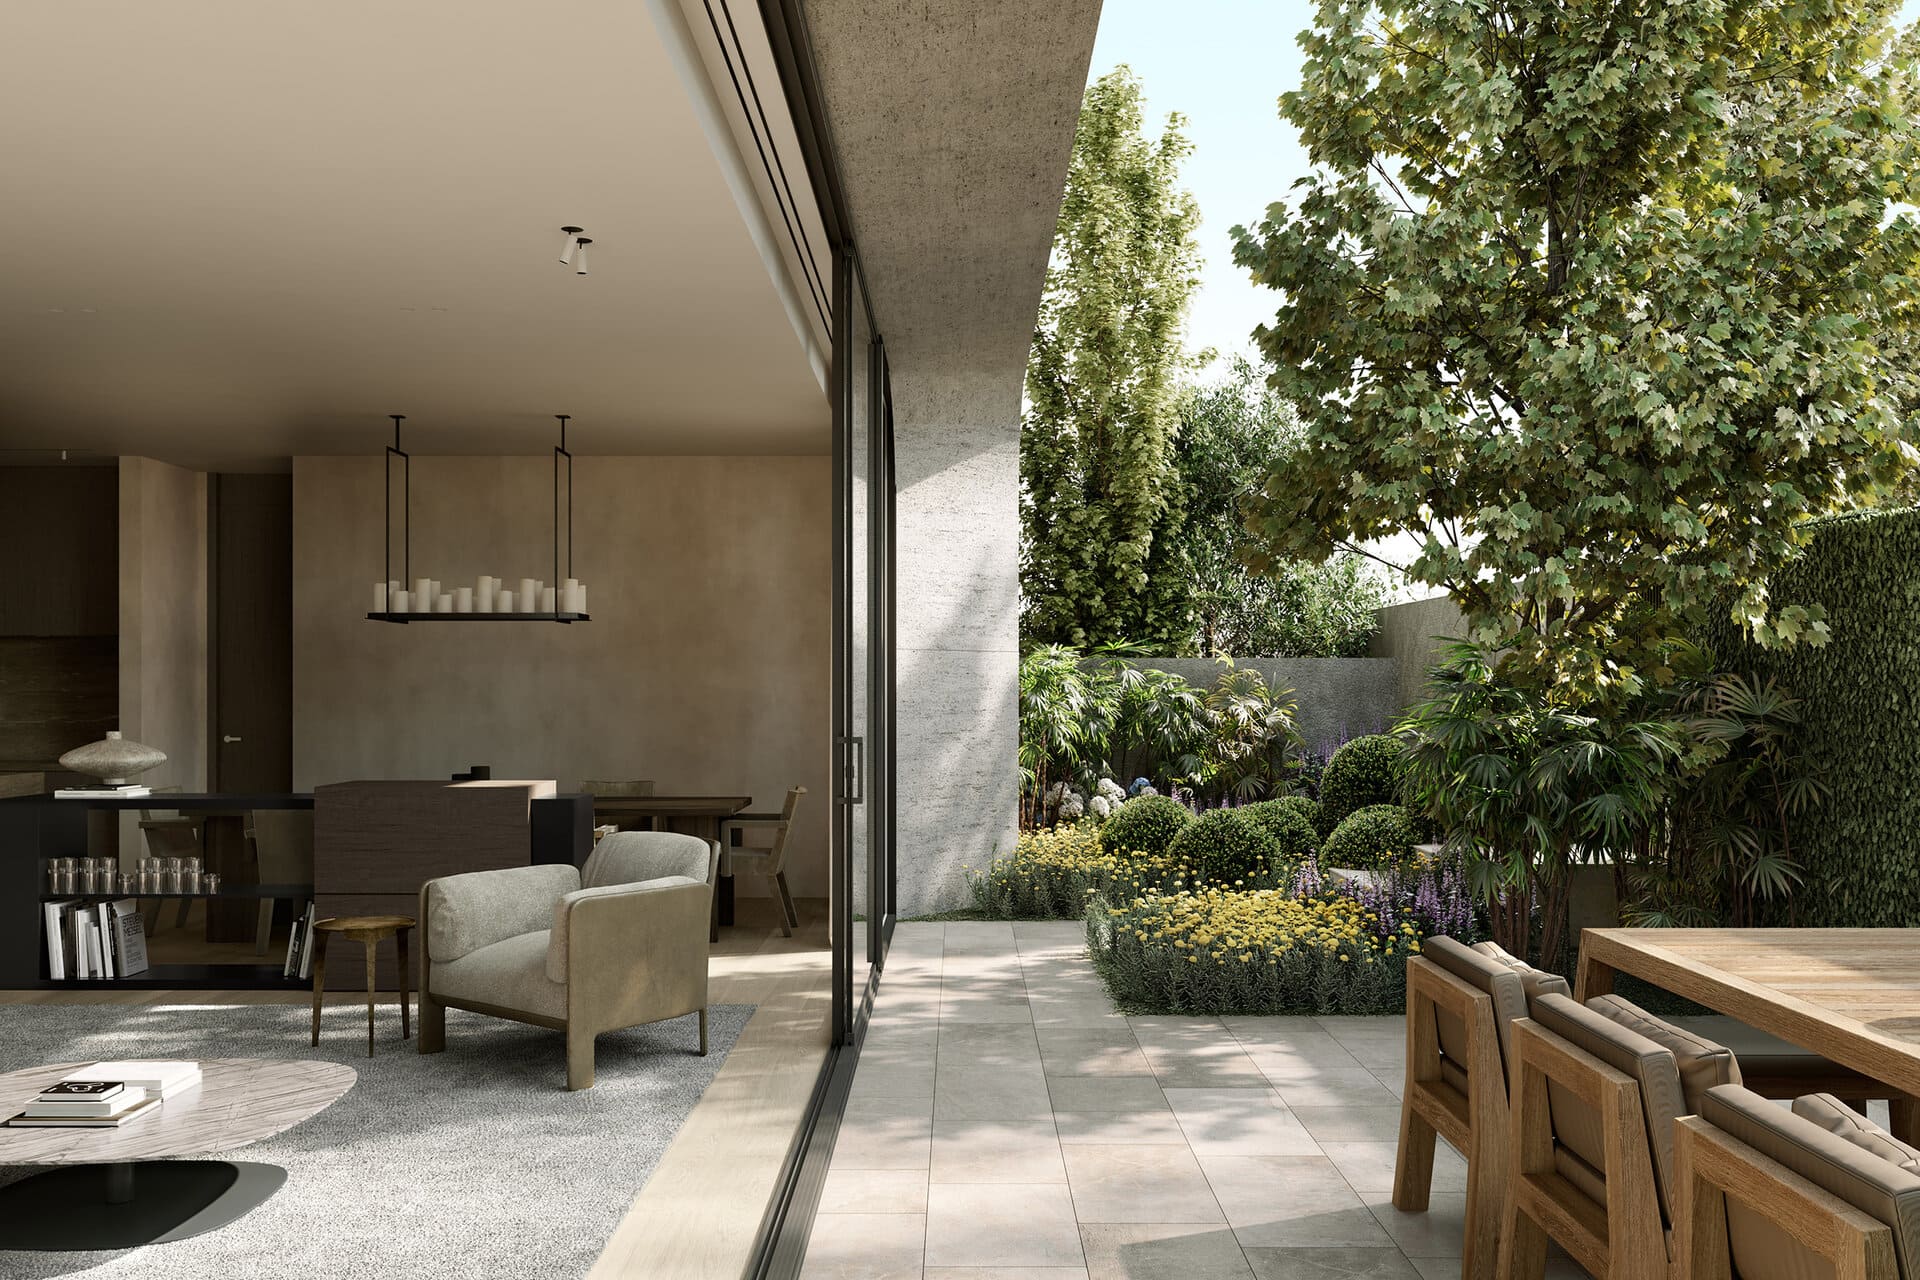 Ground Floor Living with Courtyard